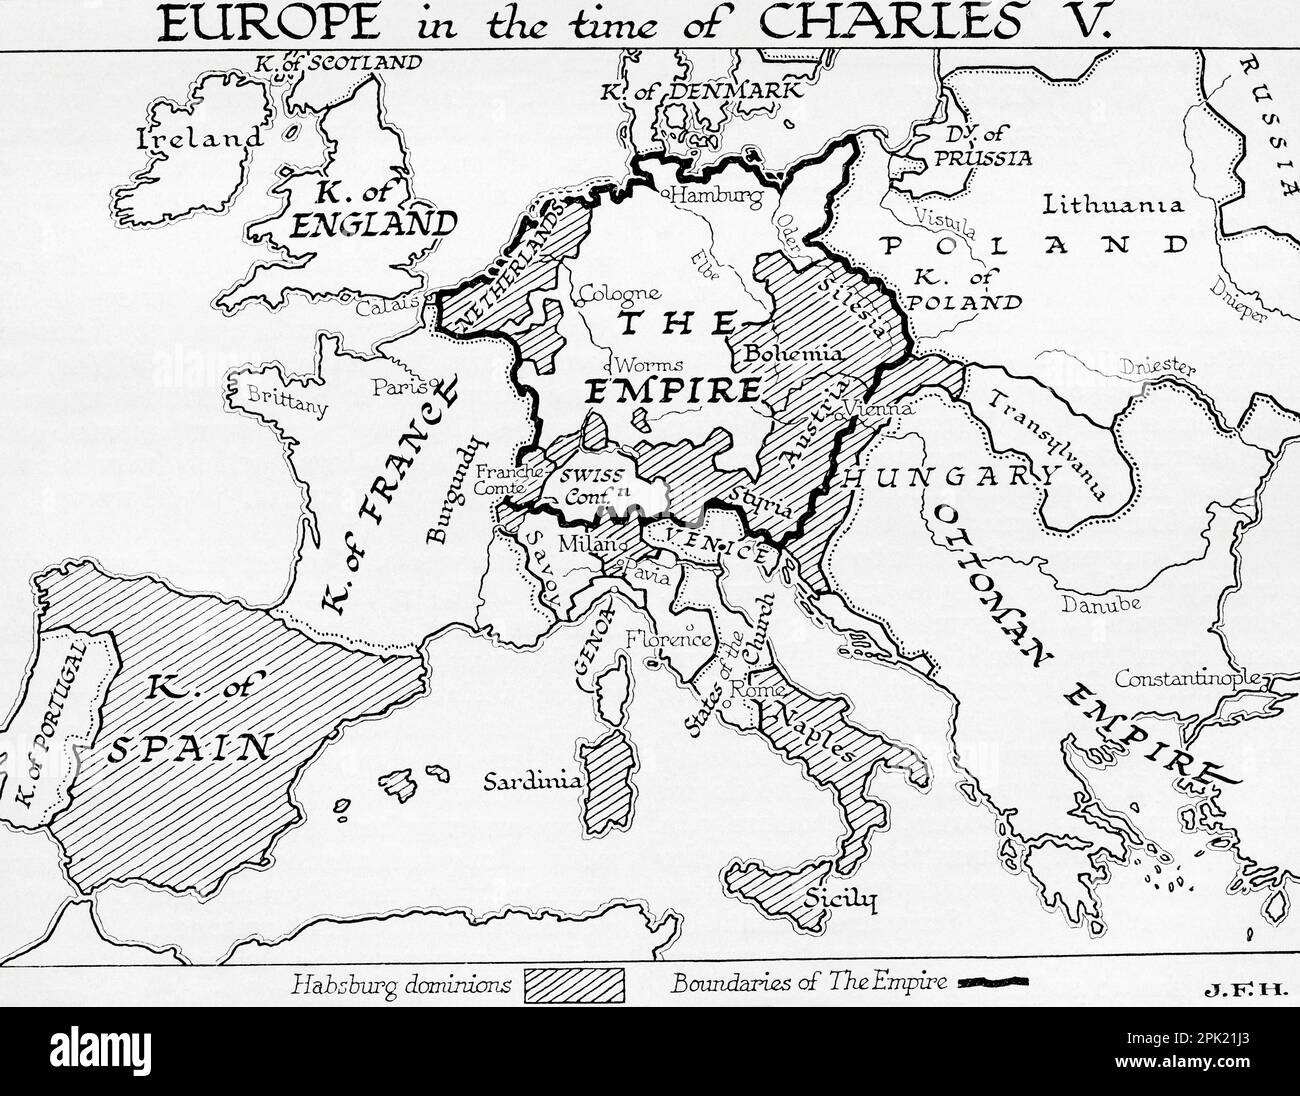 Map of Europe in the time of Charles V, Holy Roman Emperor, 16th century.  From the book Outline of History by H.G. Wells, published 1920. Stock Photo